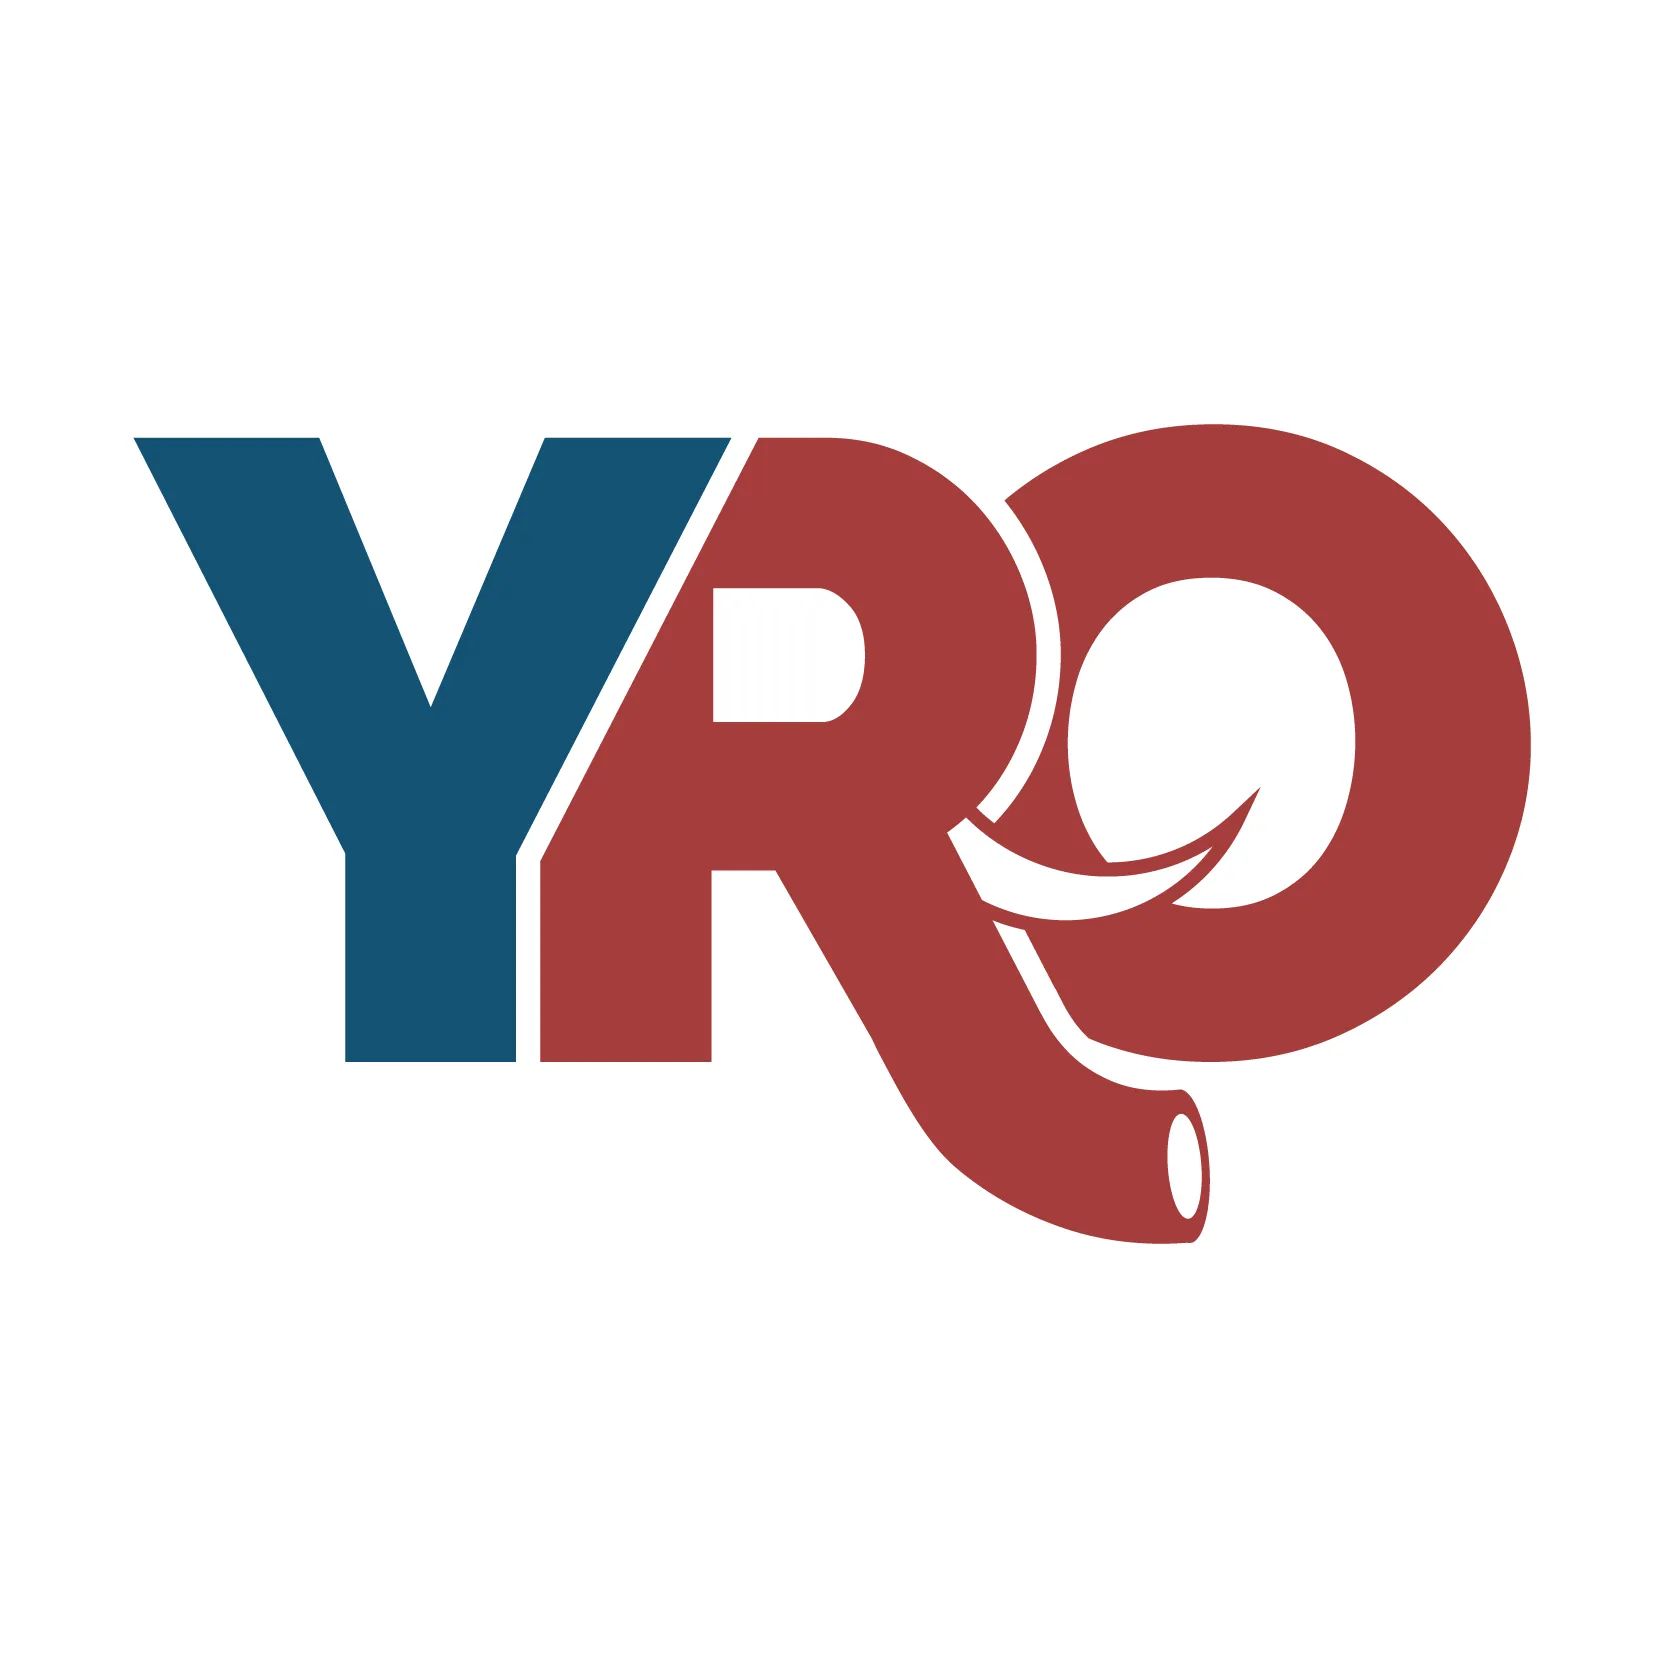 Listen: Young Republicans of Oregon Podcast Interviews Will Lathrop for Attorney General